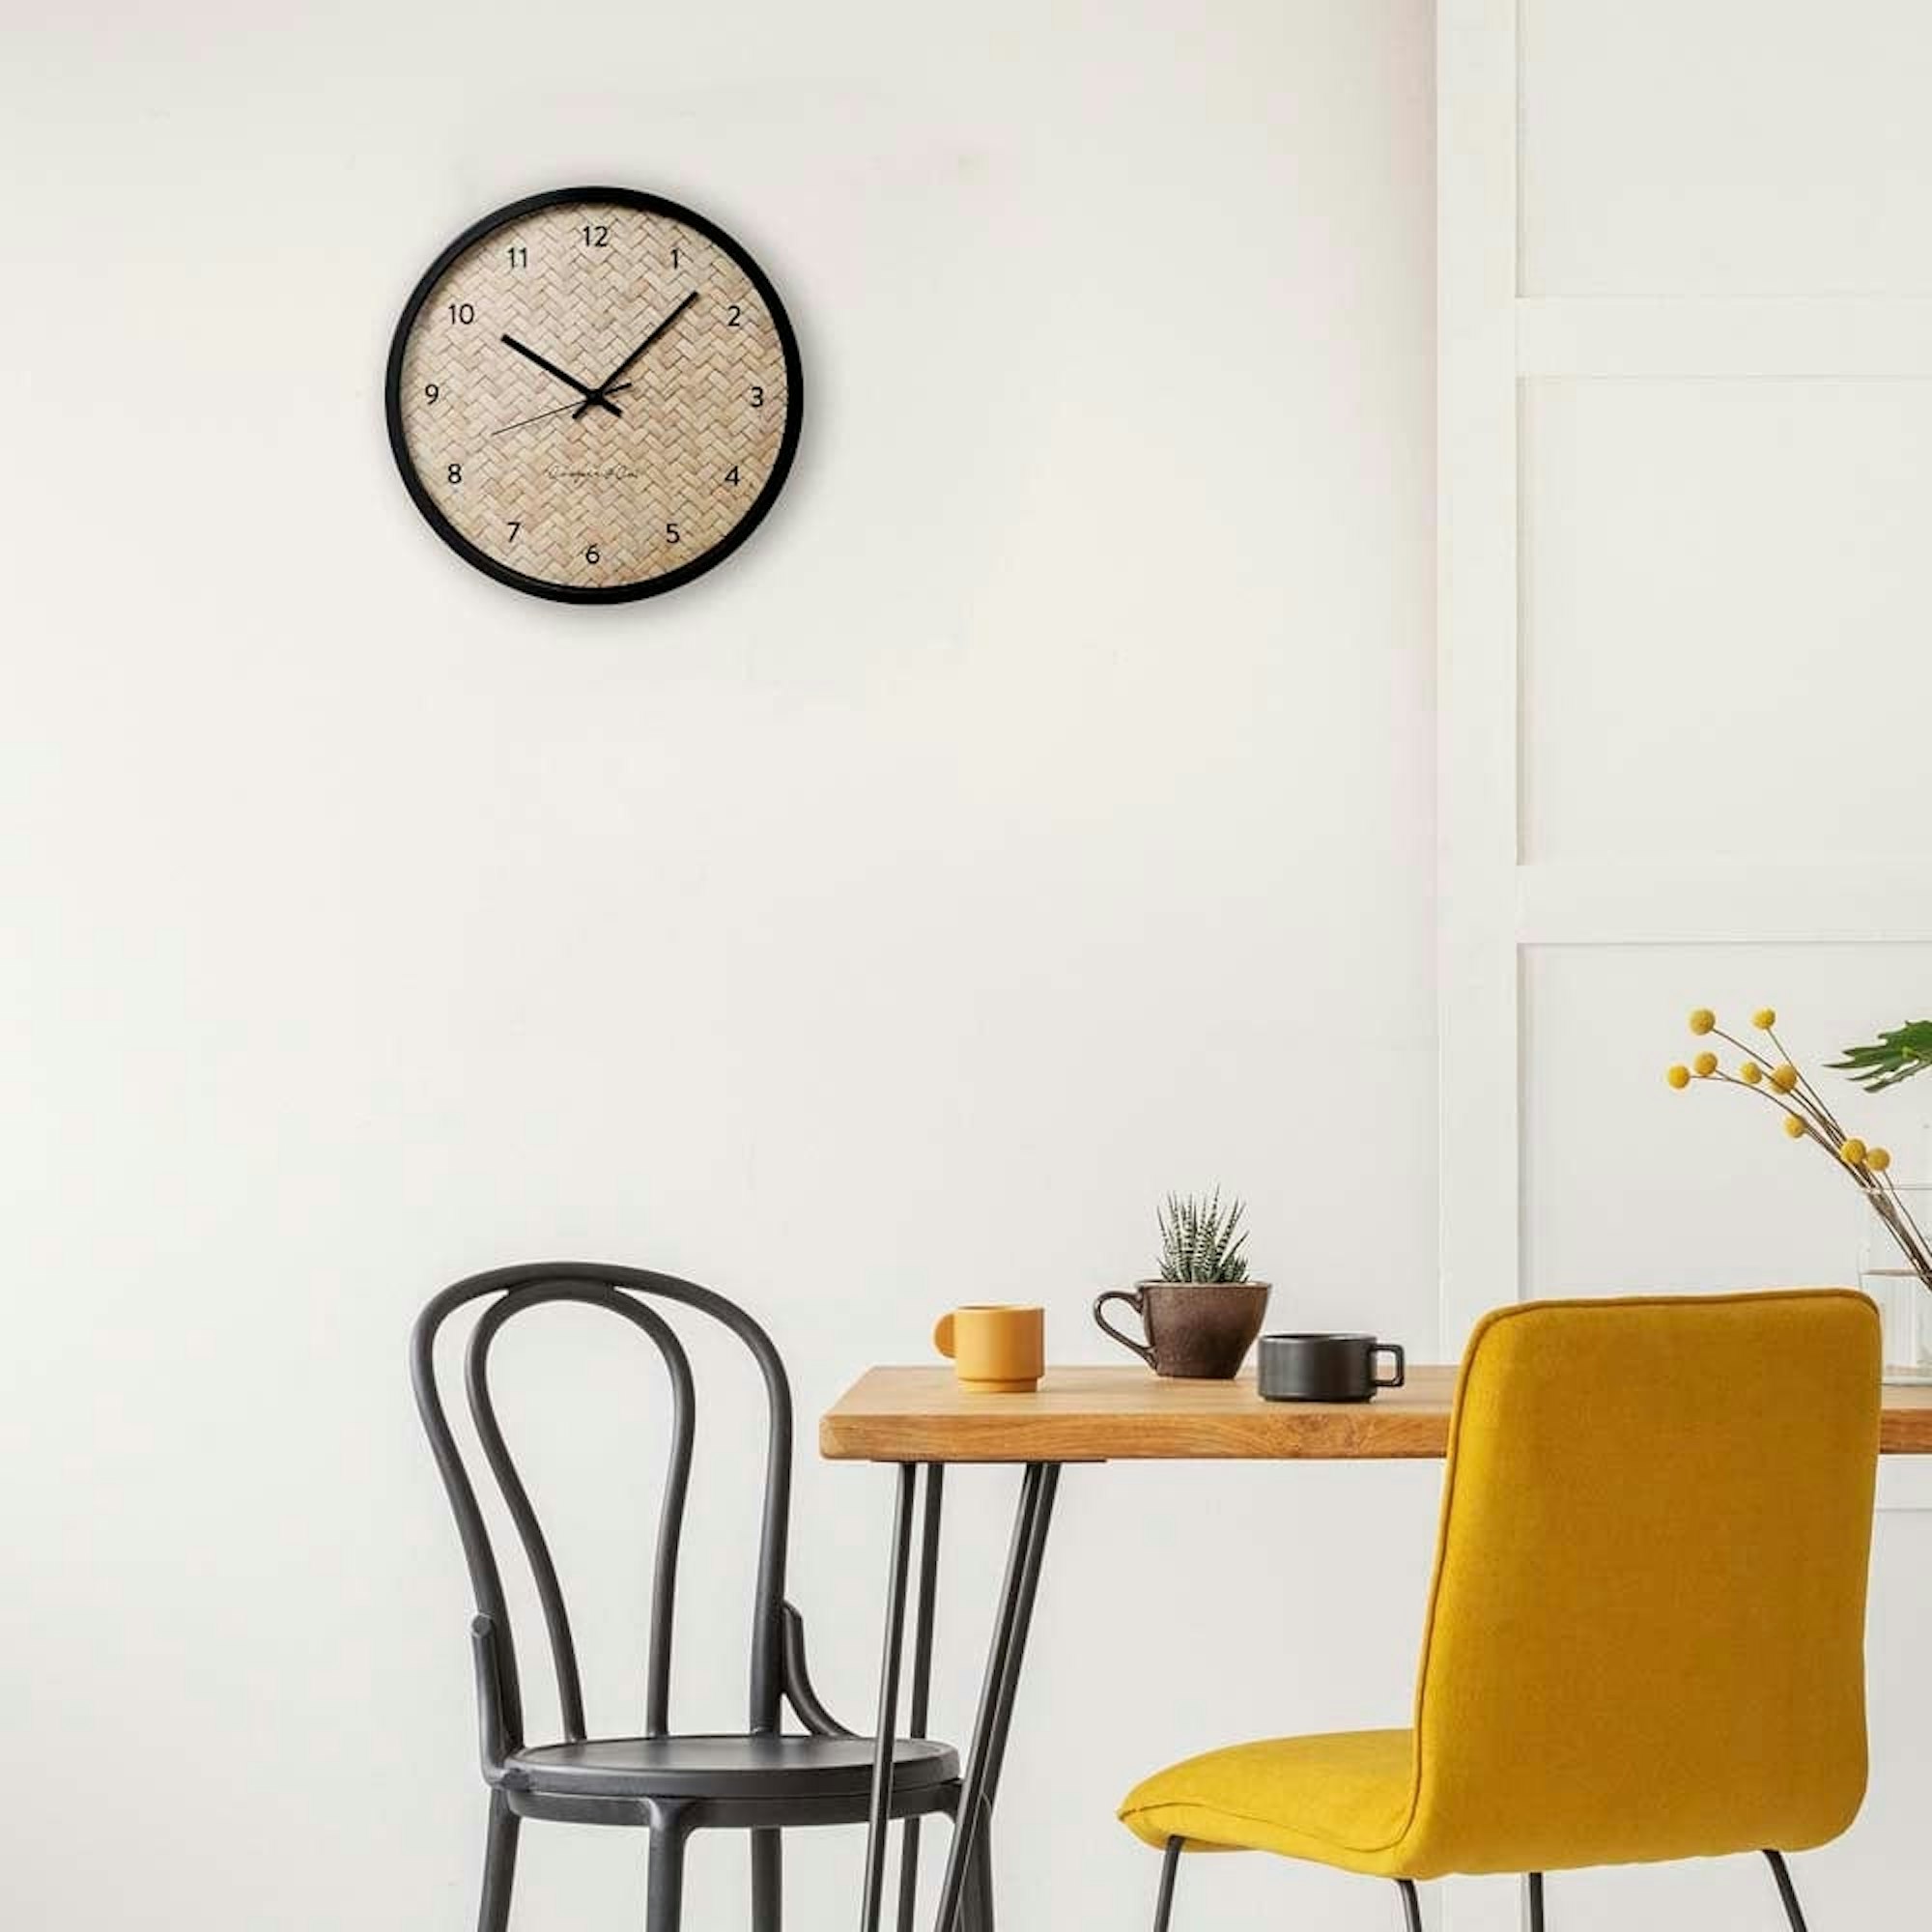 Kitchen dining setting with mix and match chairs, home decor and wall clock. Scandinavian style setting.